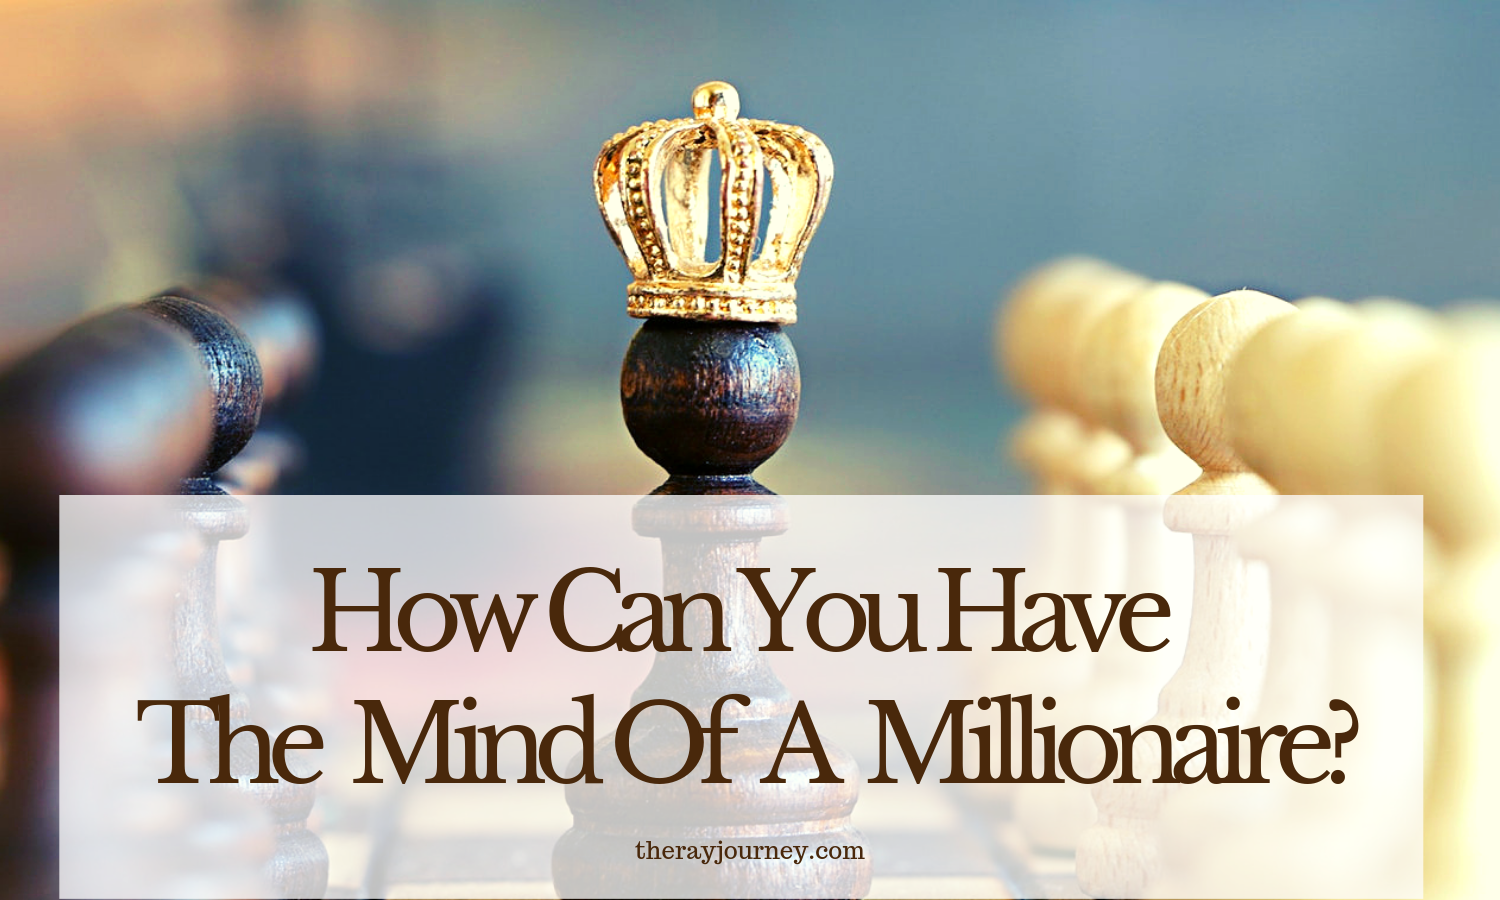 How Can You Have The Mind Of A Millionaire?